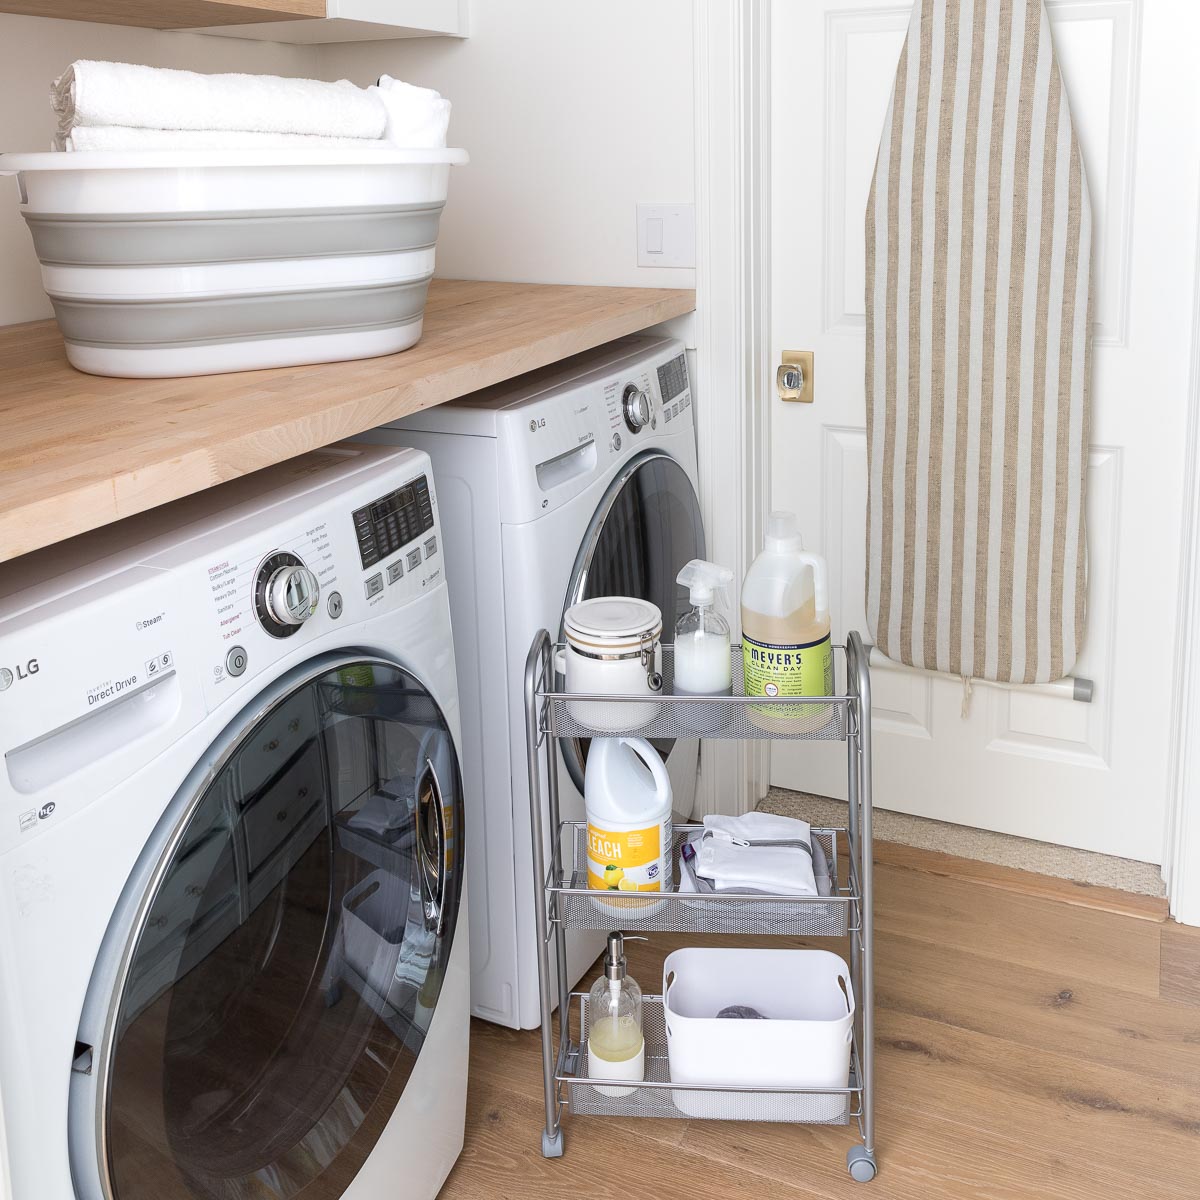 Adding wire shelving can be a practical way to turn a cluttered laundry space into an organized room. Here are 3 ways you can use them...